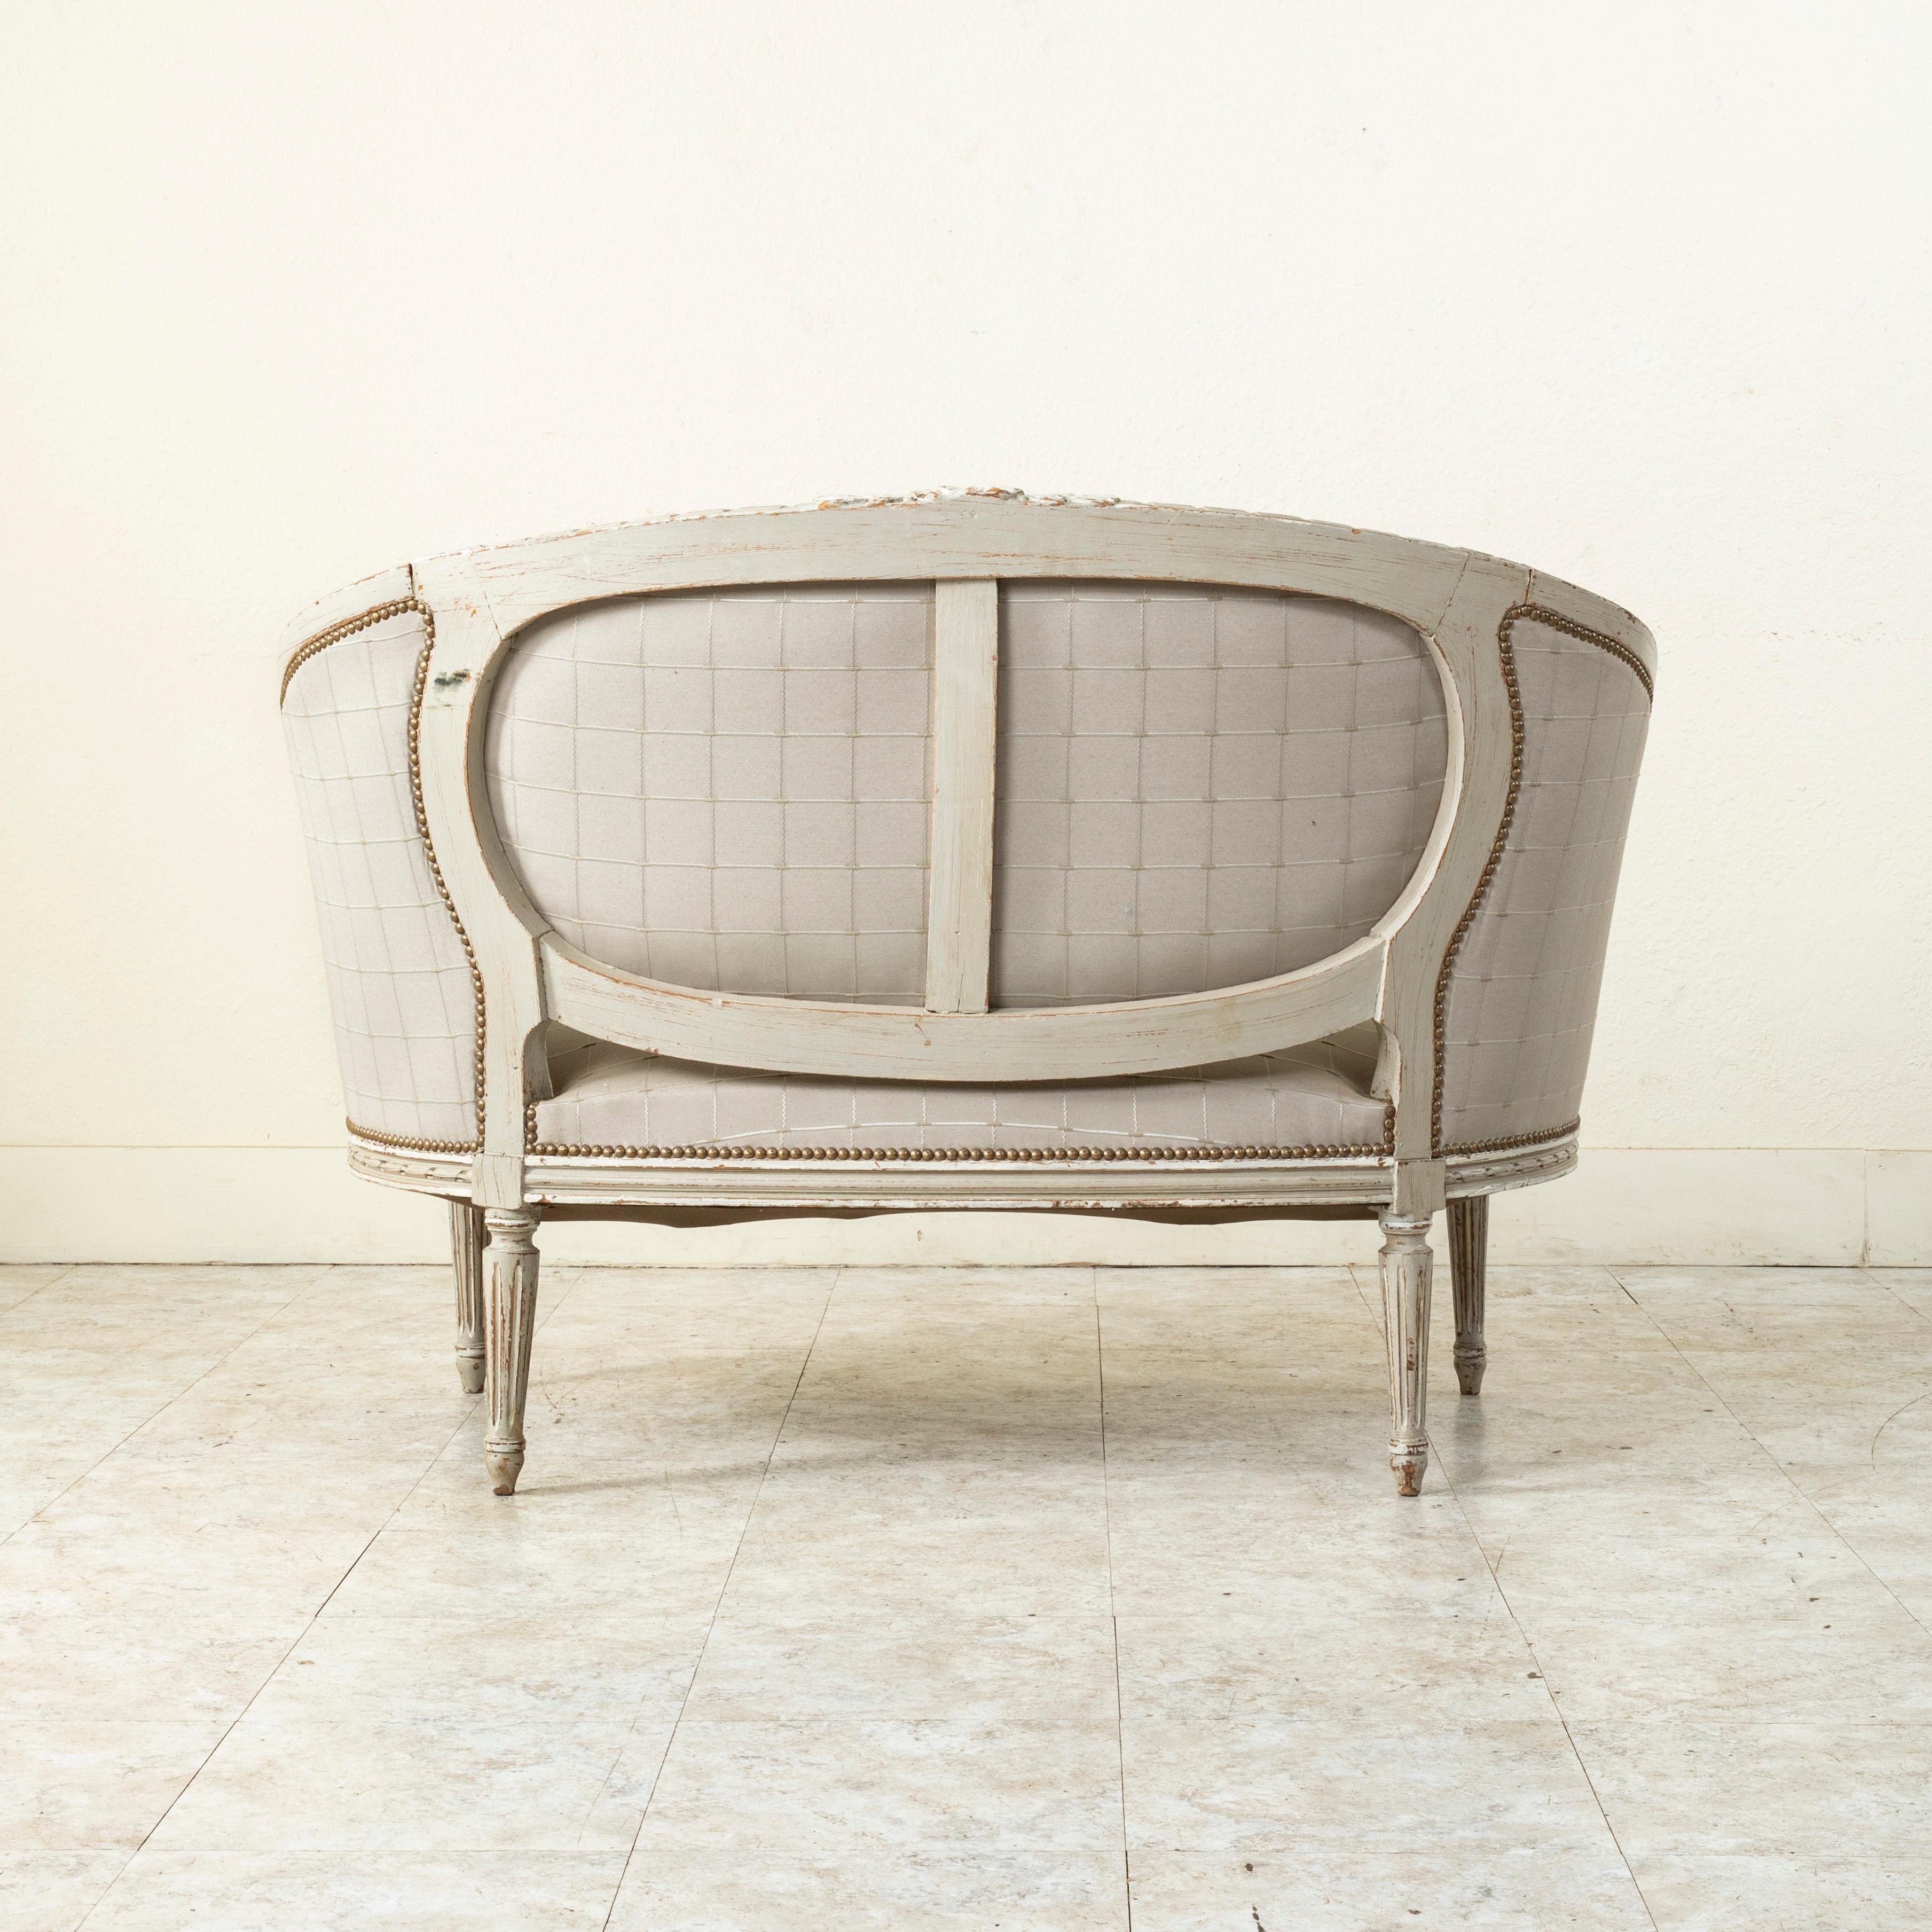 Upholstery Early 20th Century French Louis XVI Style Painted Settee or Banquette